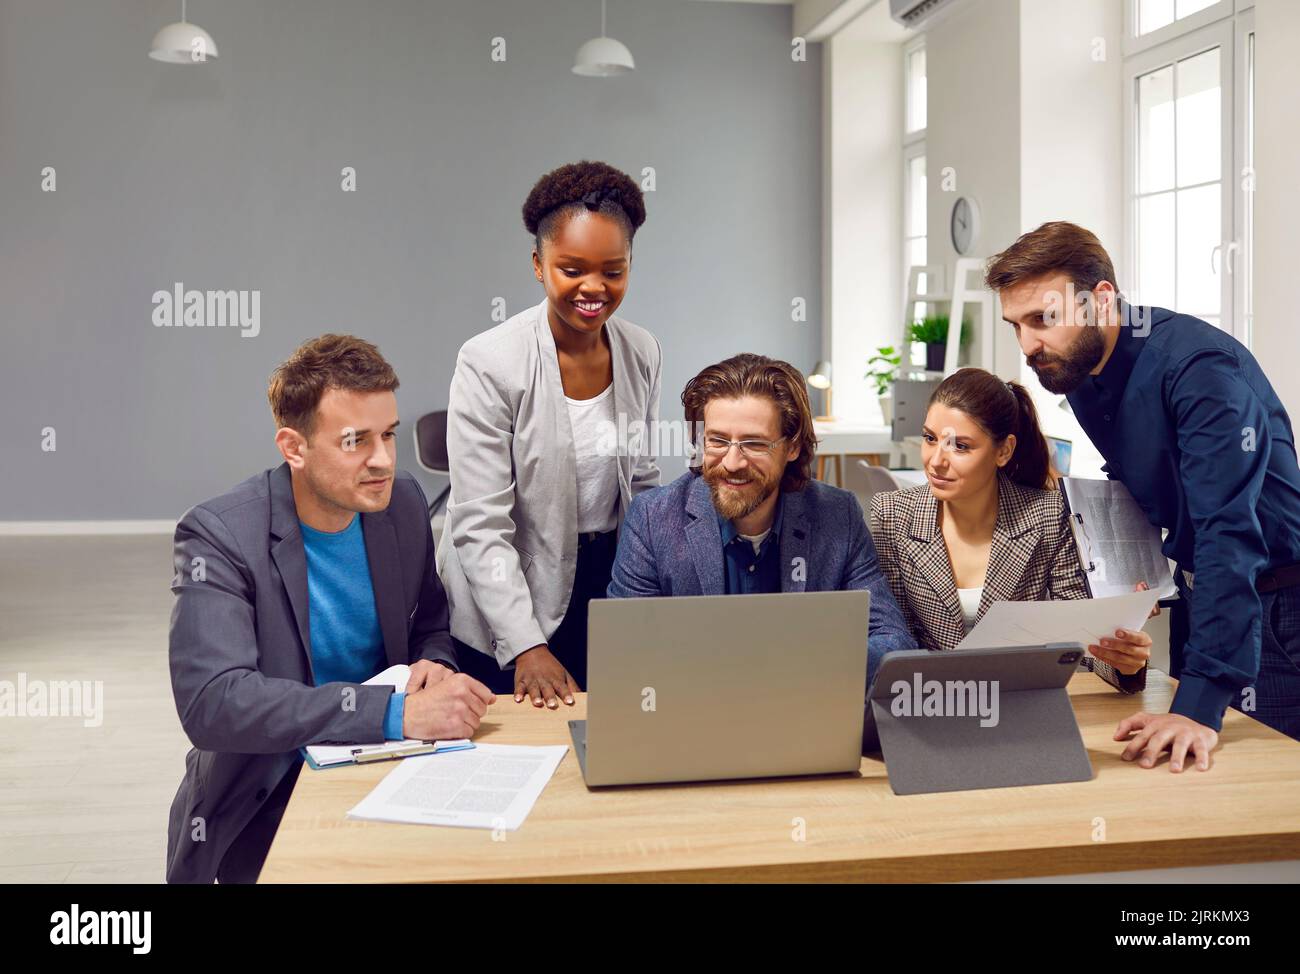 Diverse team of happy people use a laptop and tablet while working on a business project together Stock Photo